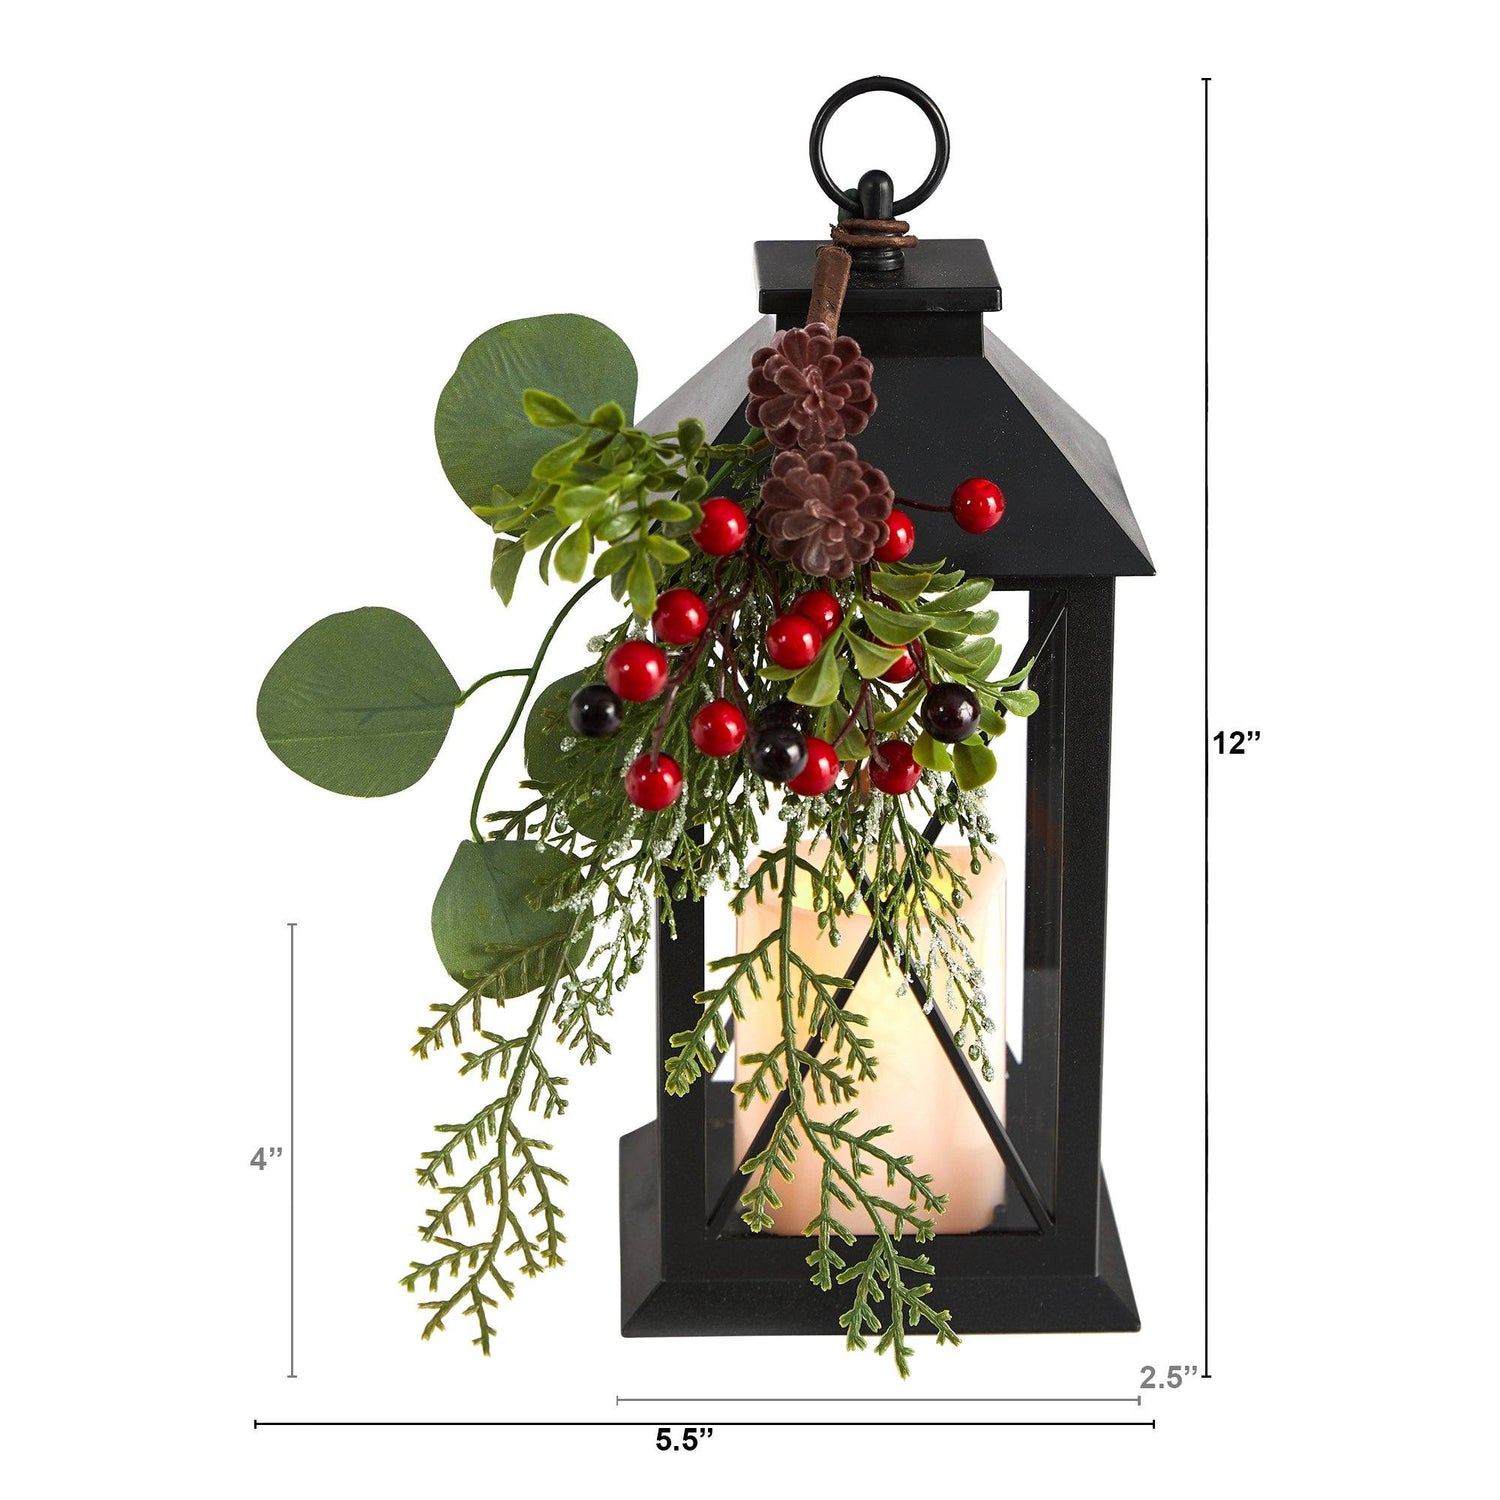 12" Holiday Berries and Greenery Metal Lantern Table Christmas Arrangement with LED Candle Included"